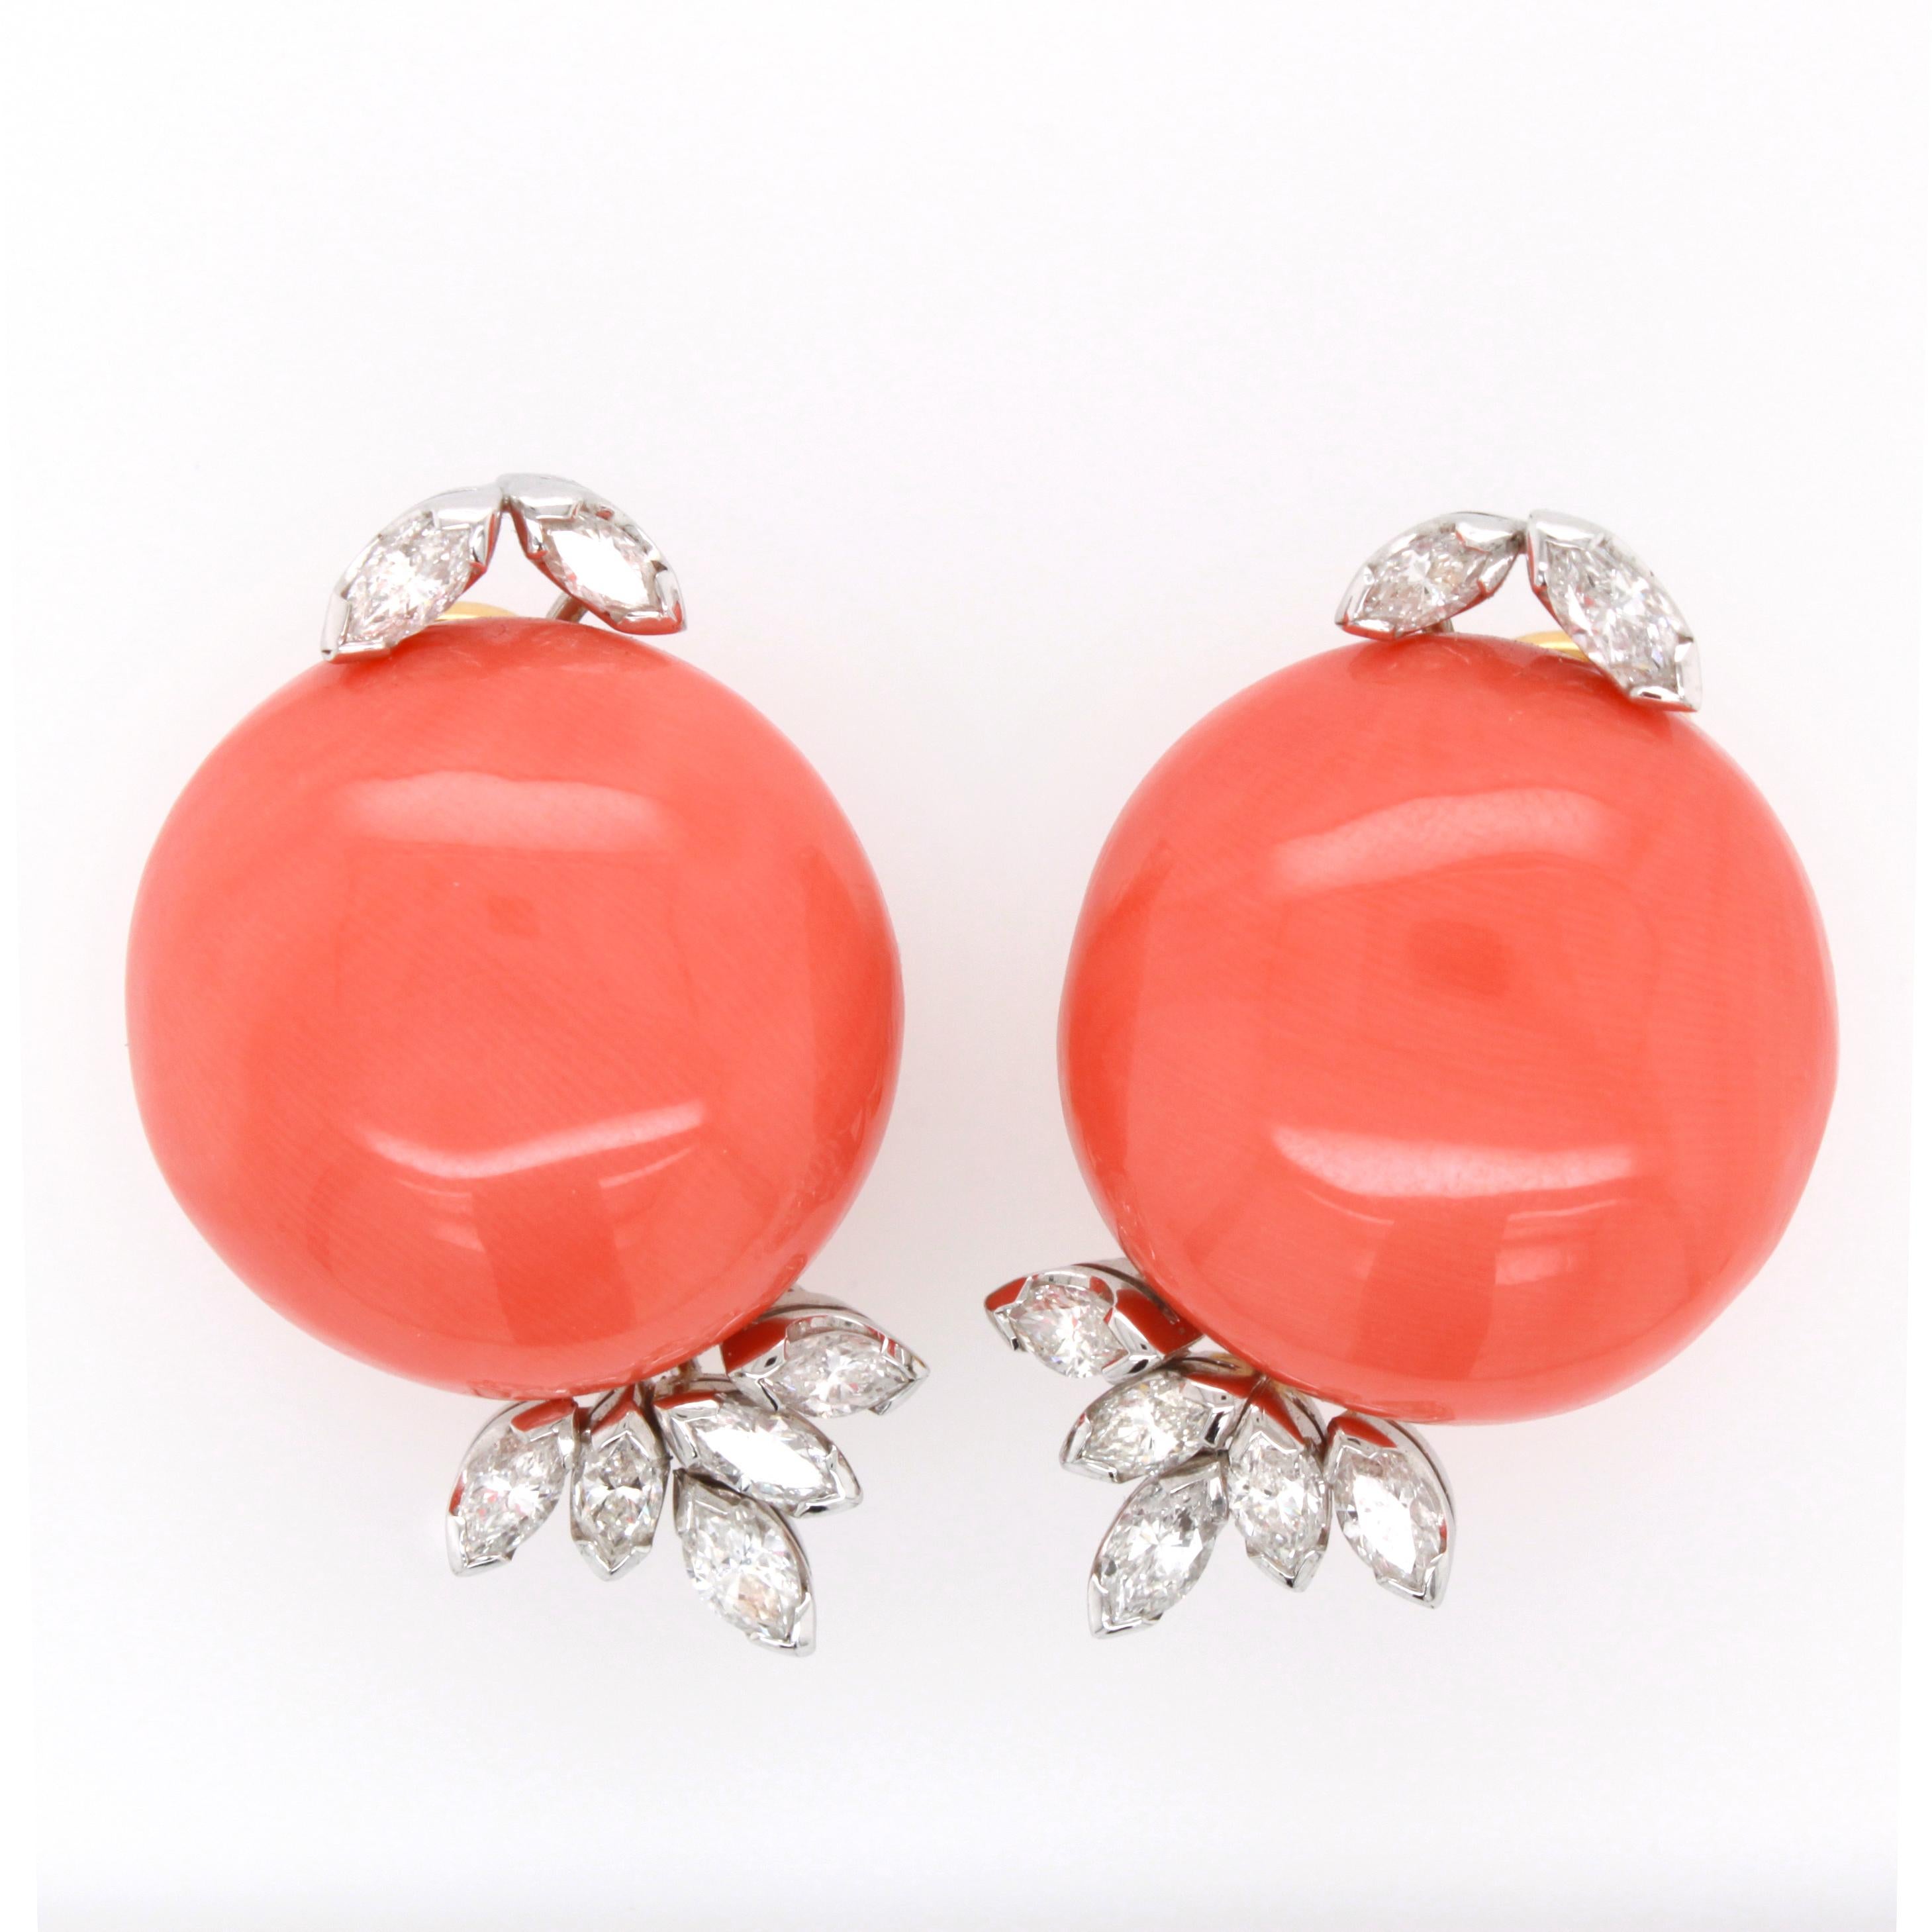 A pair of earclips, each with a big coral cabochon and marquise cut diamonds. The corals have a diameter of 21mm and the total diamond weight is approximately 1.5 carats. The earrings have the 18k yellow gold stamp and Italian marks.